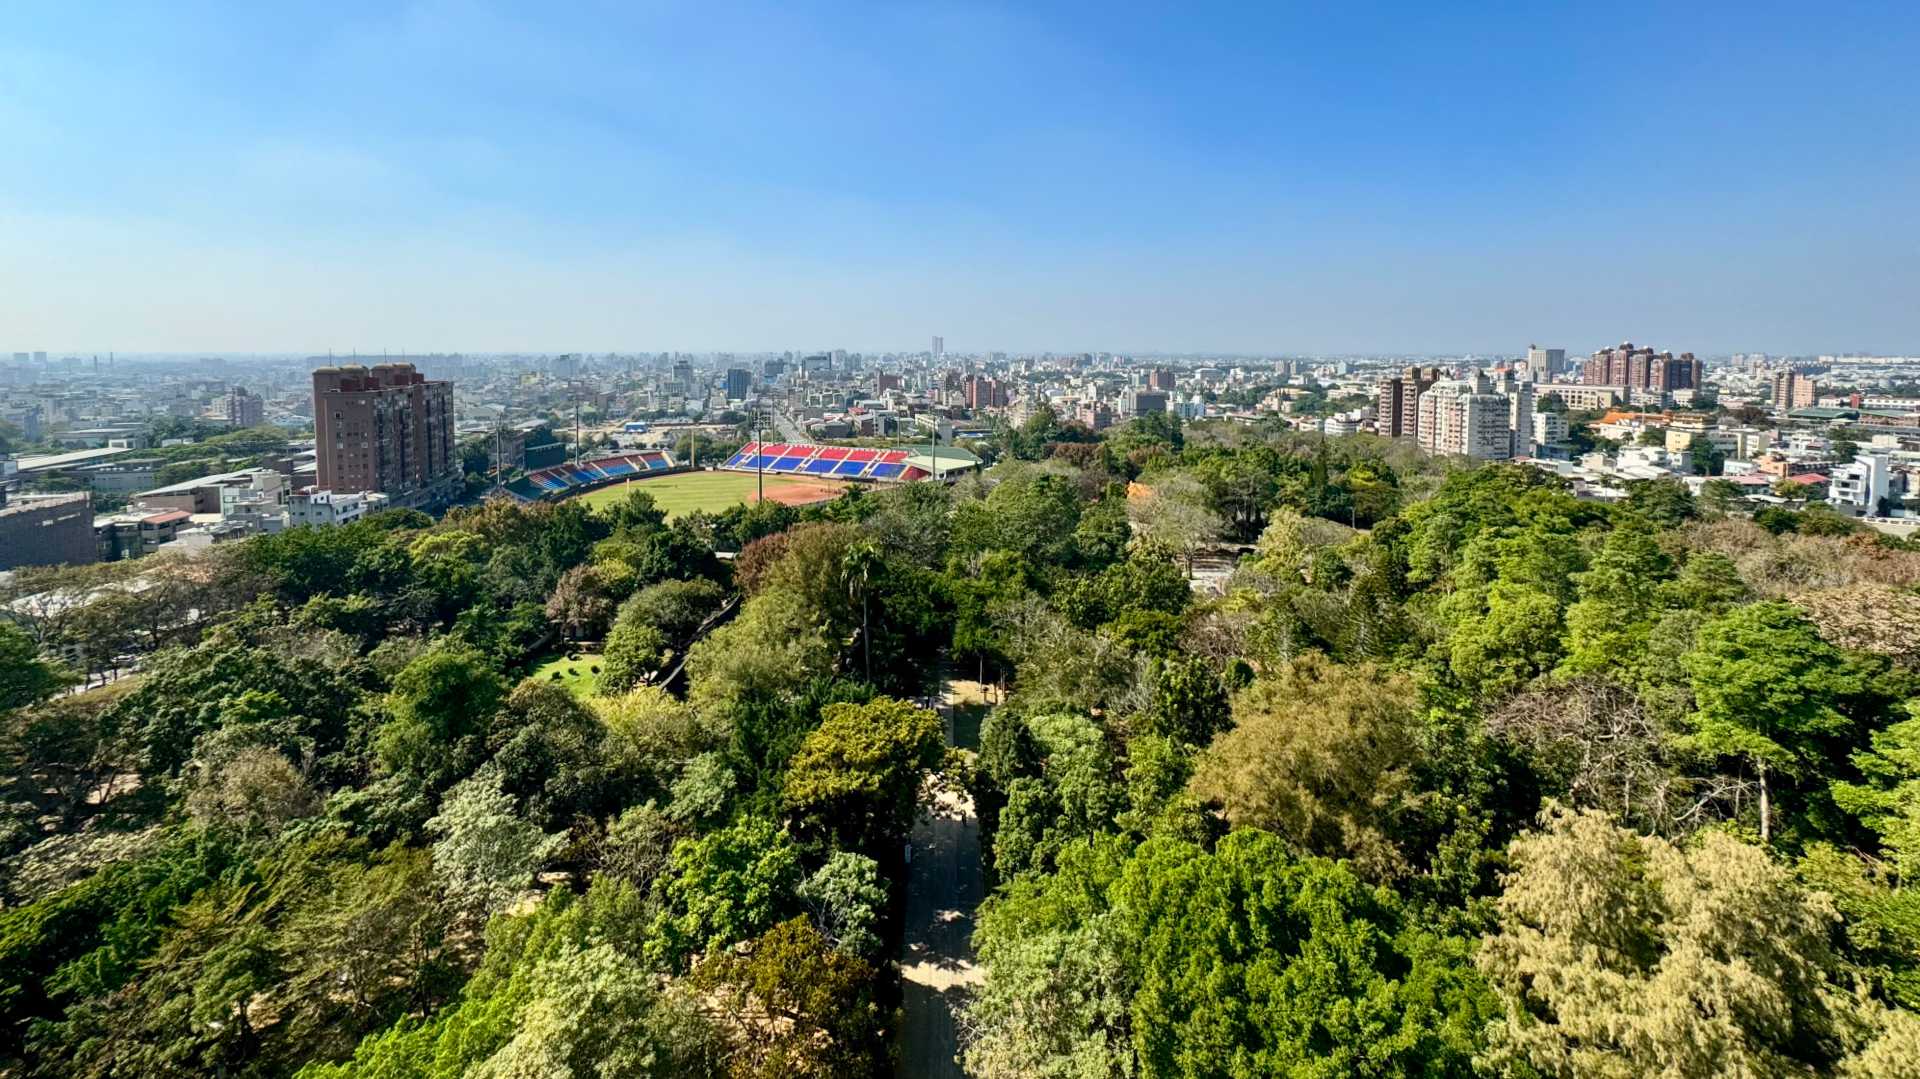 View across Chiayi City, Taiwan. The treetops of Chiayi Park are in the foreground. In the distance is a sports stadium, high rise buildings, and more buildings leading to the horizon.